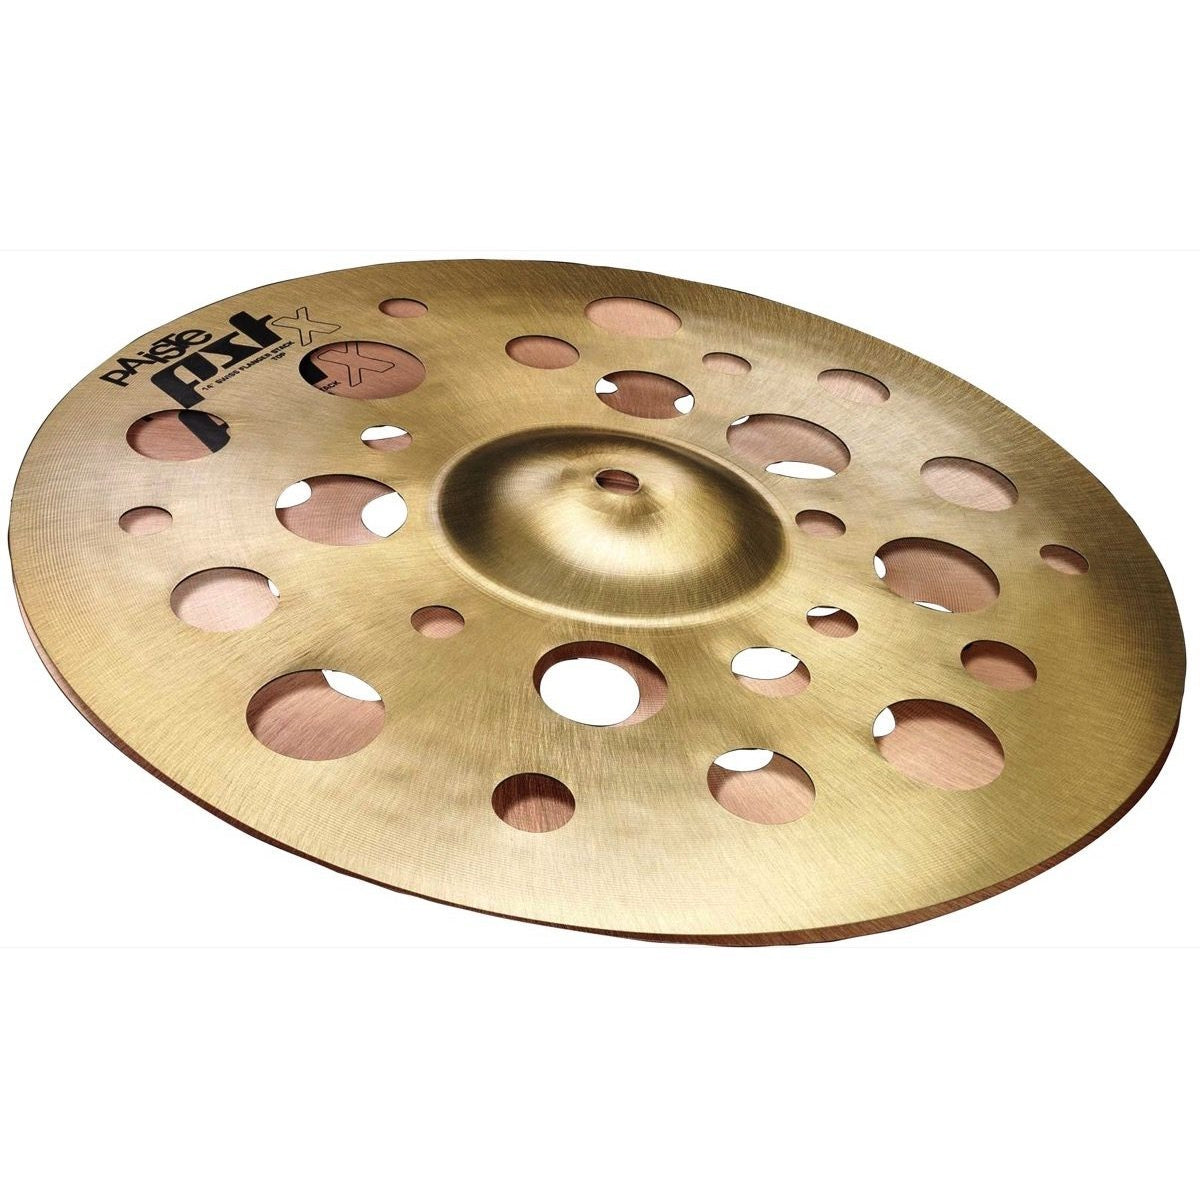 Paiste PST X Swiss Flanger Stack Cymbal, 14 Inch